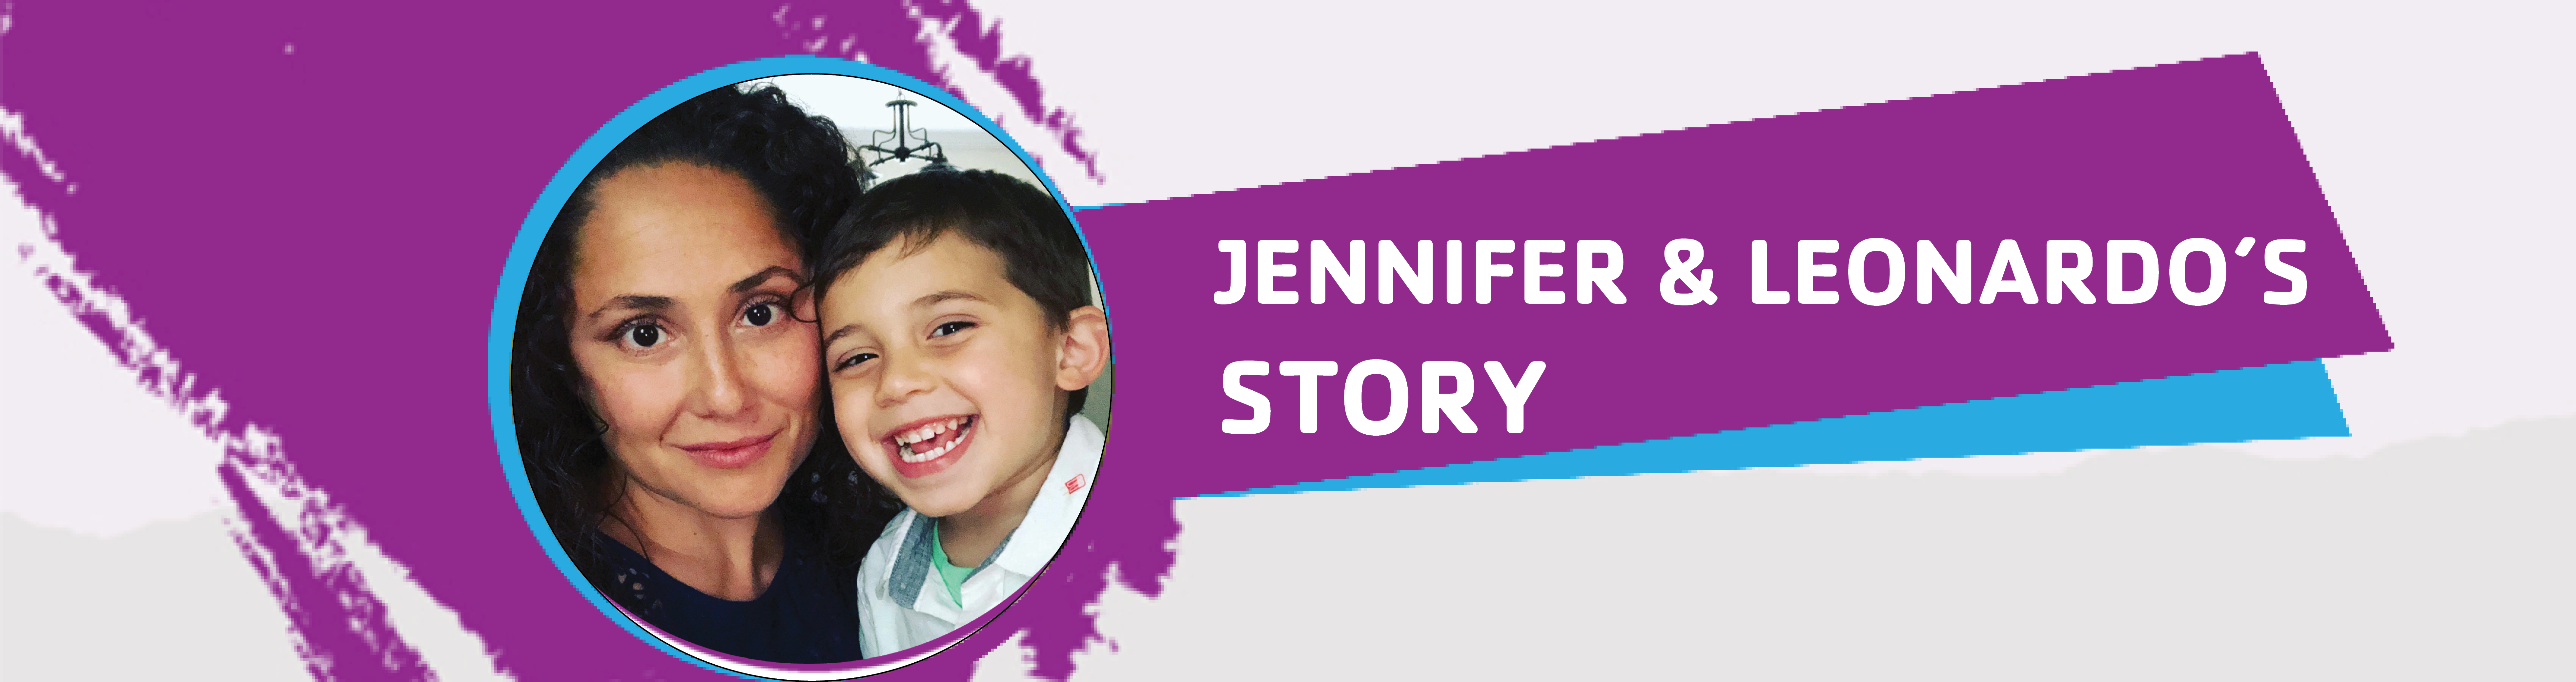 Jessica and her son Leonardo share how the Darien YMCA has impacted their lives.